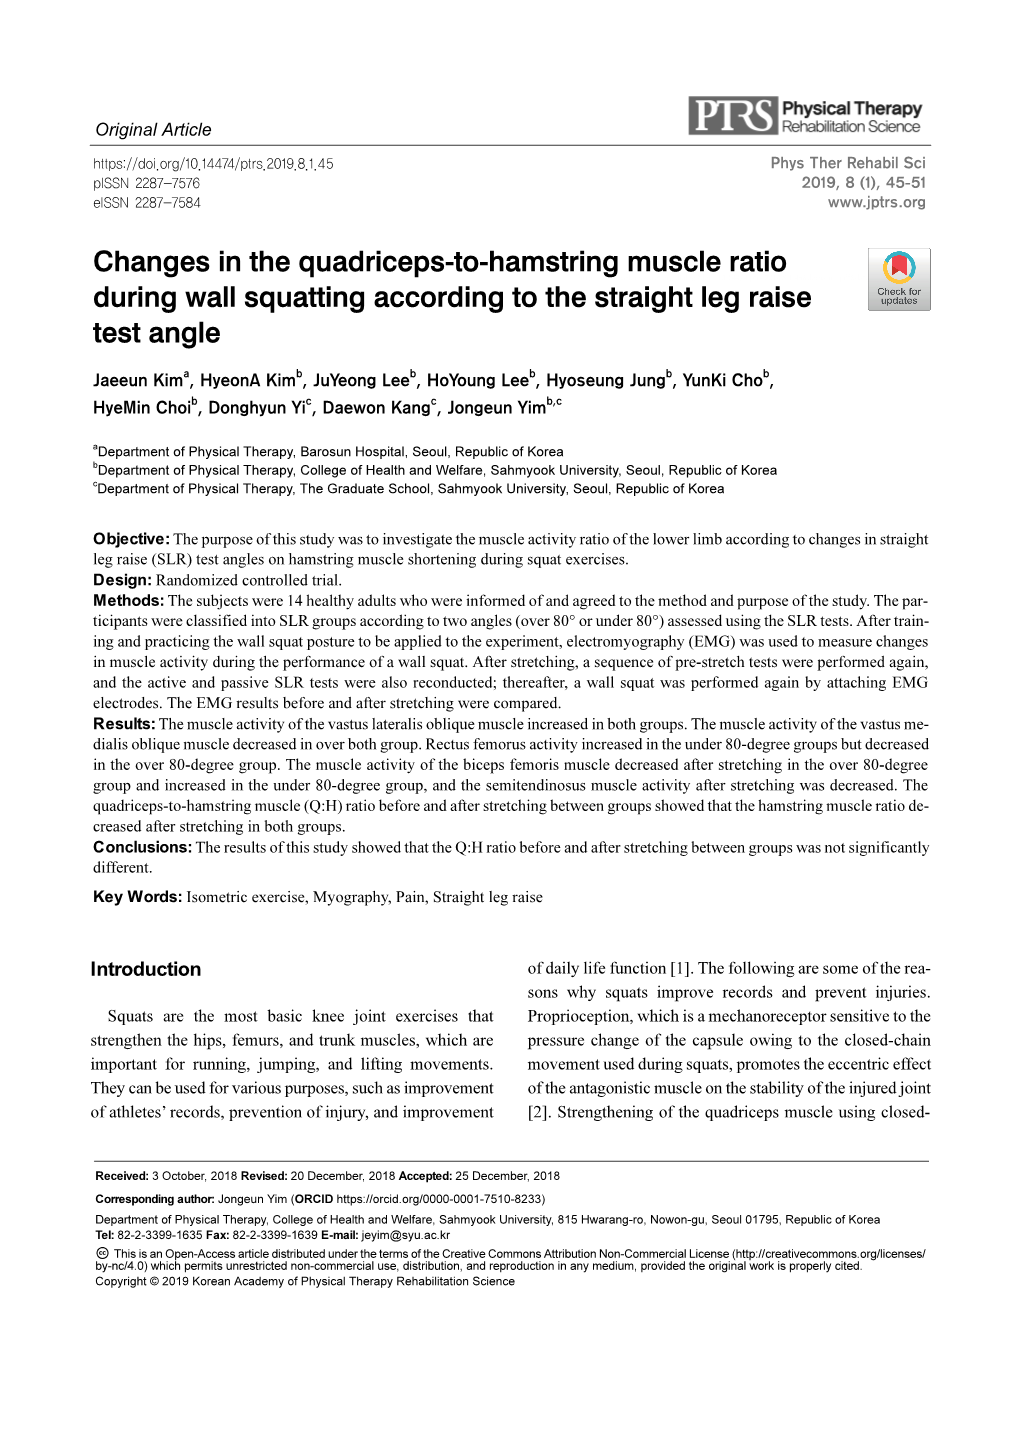 Changes in the Quadriceps-To-Hamstring Muscle